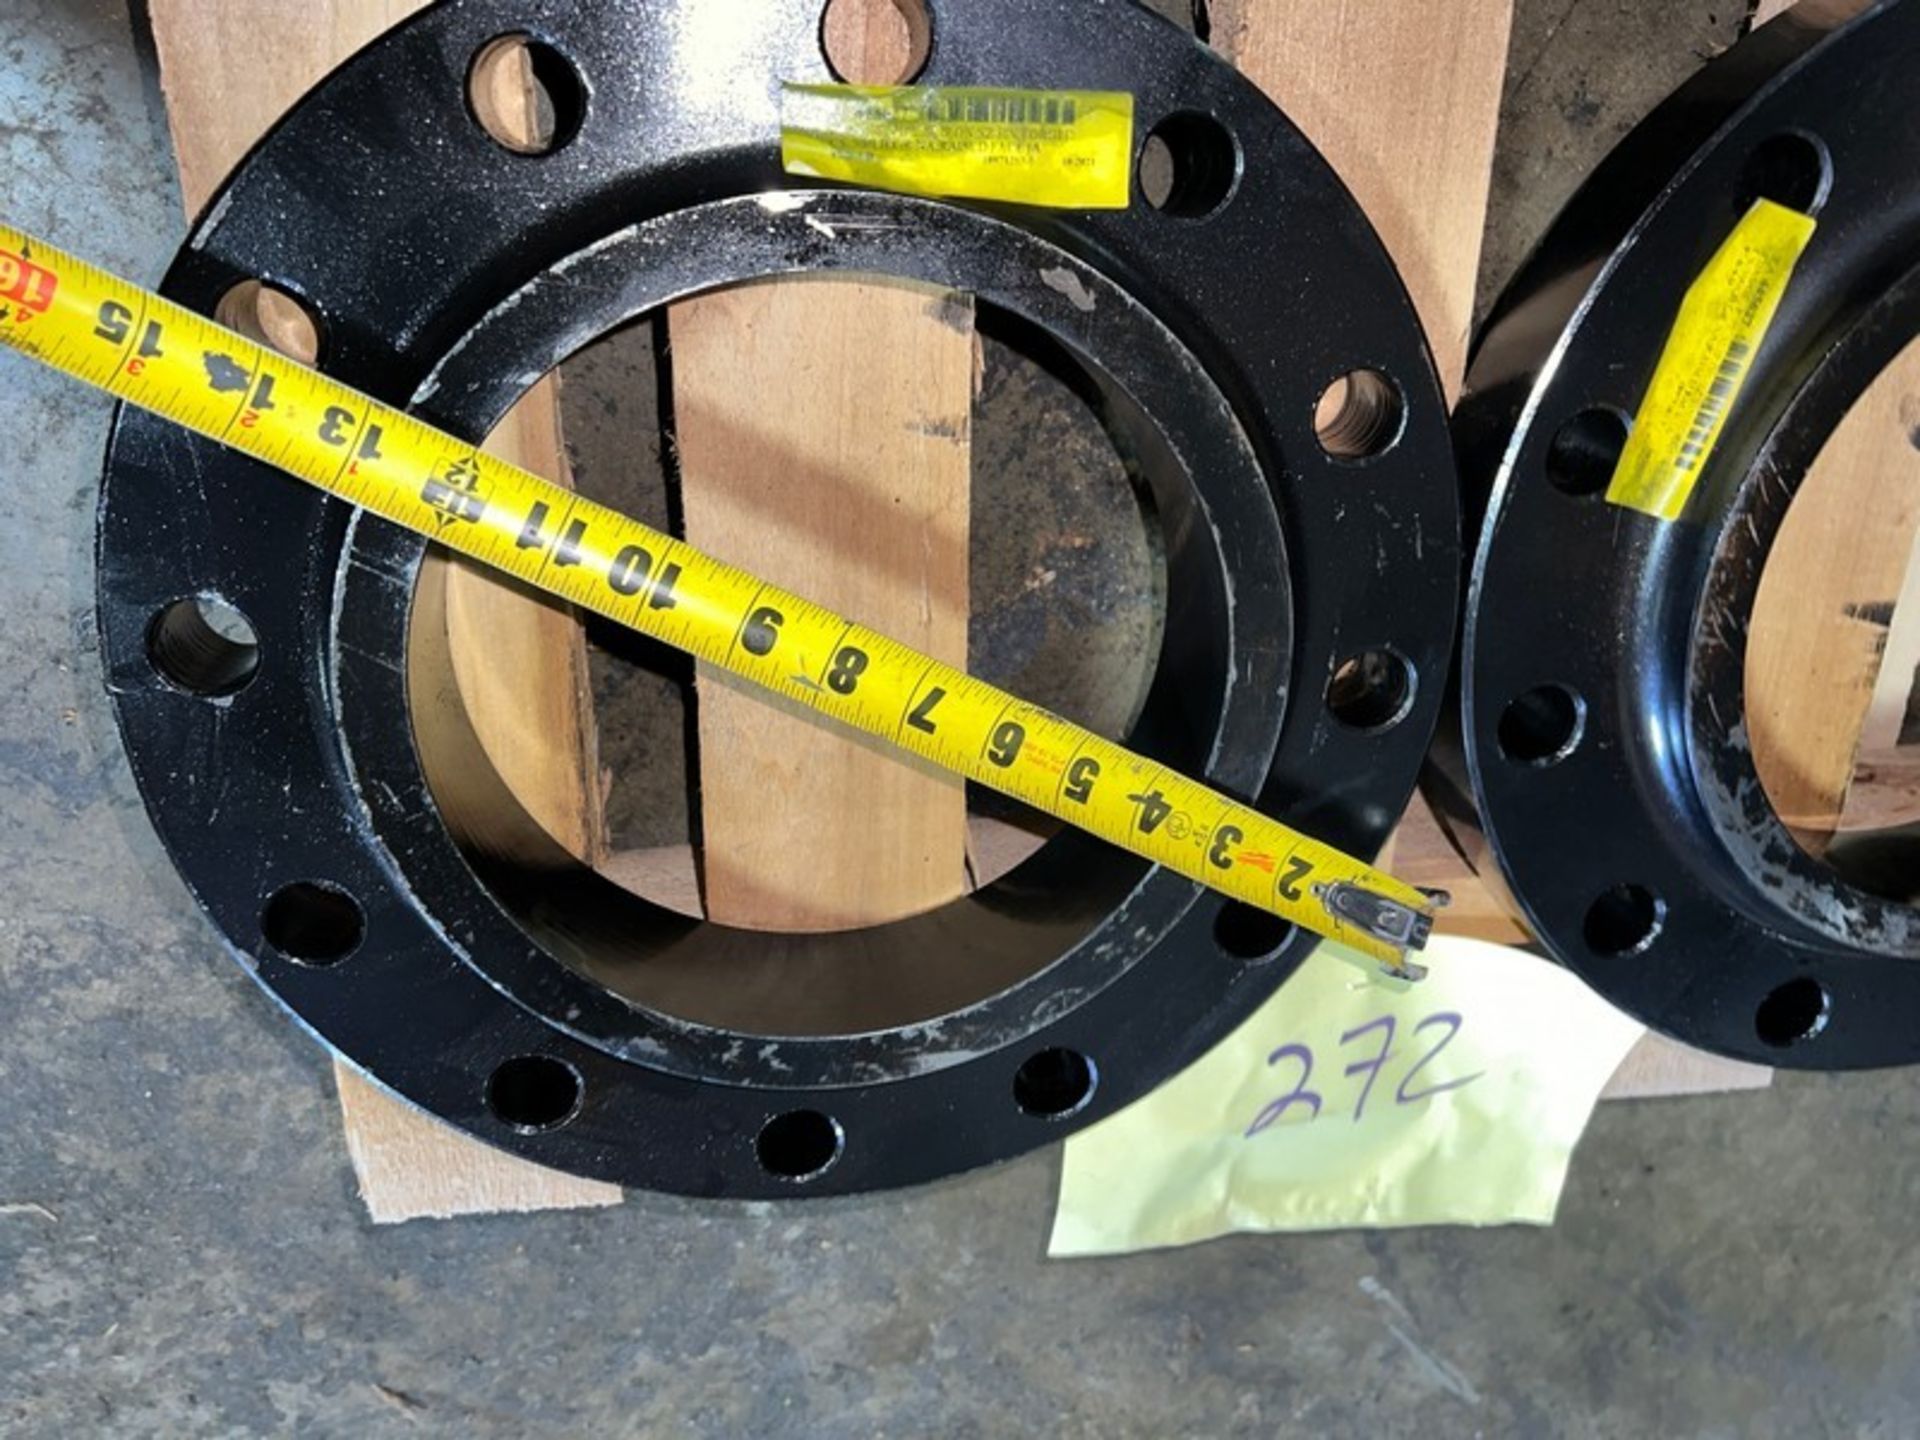 One Lot 9 Cast Iron Pipe Flanges 15" OD, 8.5" ID, 12 Bolt Holes, 1.5" thickness, 2.5" bore depth ( - Image 6 of 7